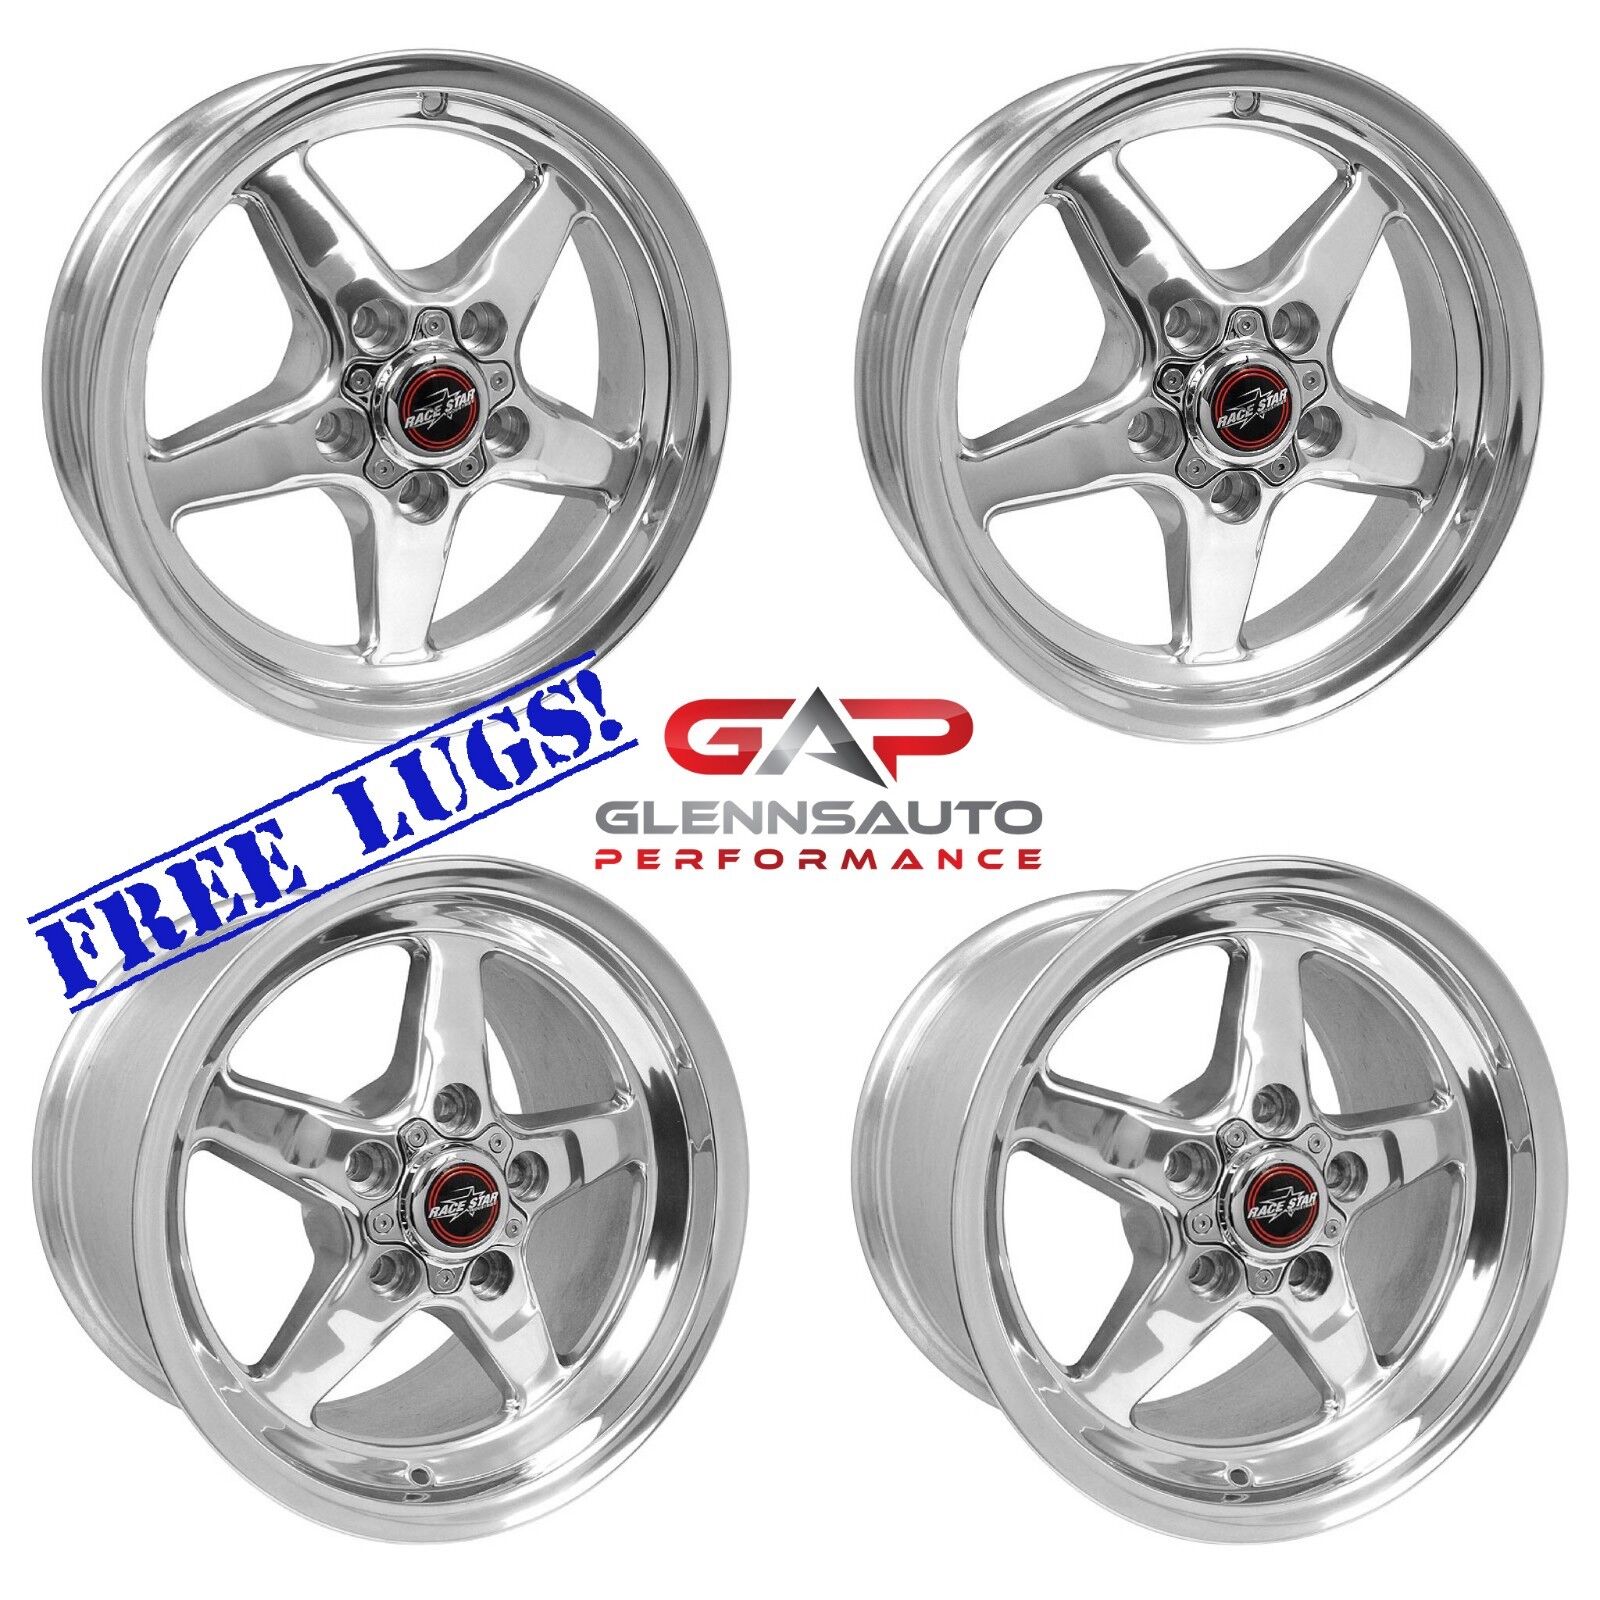 Race Star Drag Pack 15x8/15x3.75 for 2004-06 GTO (Polished) - 4 Wheel Combo